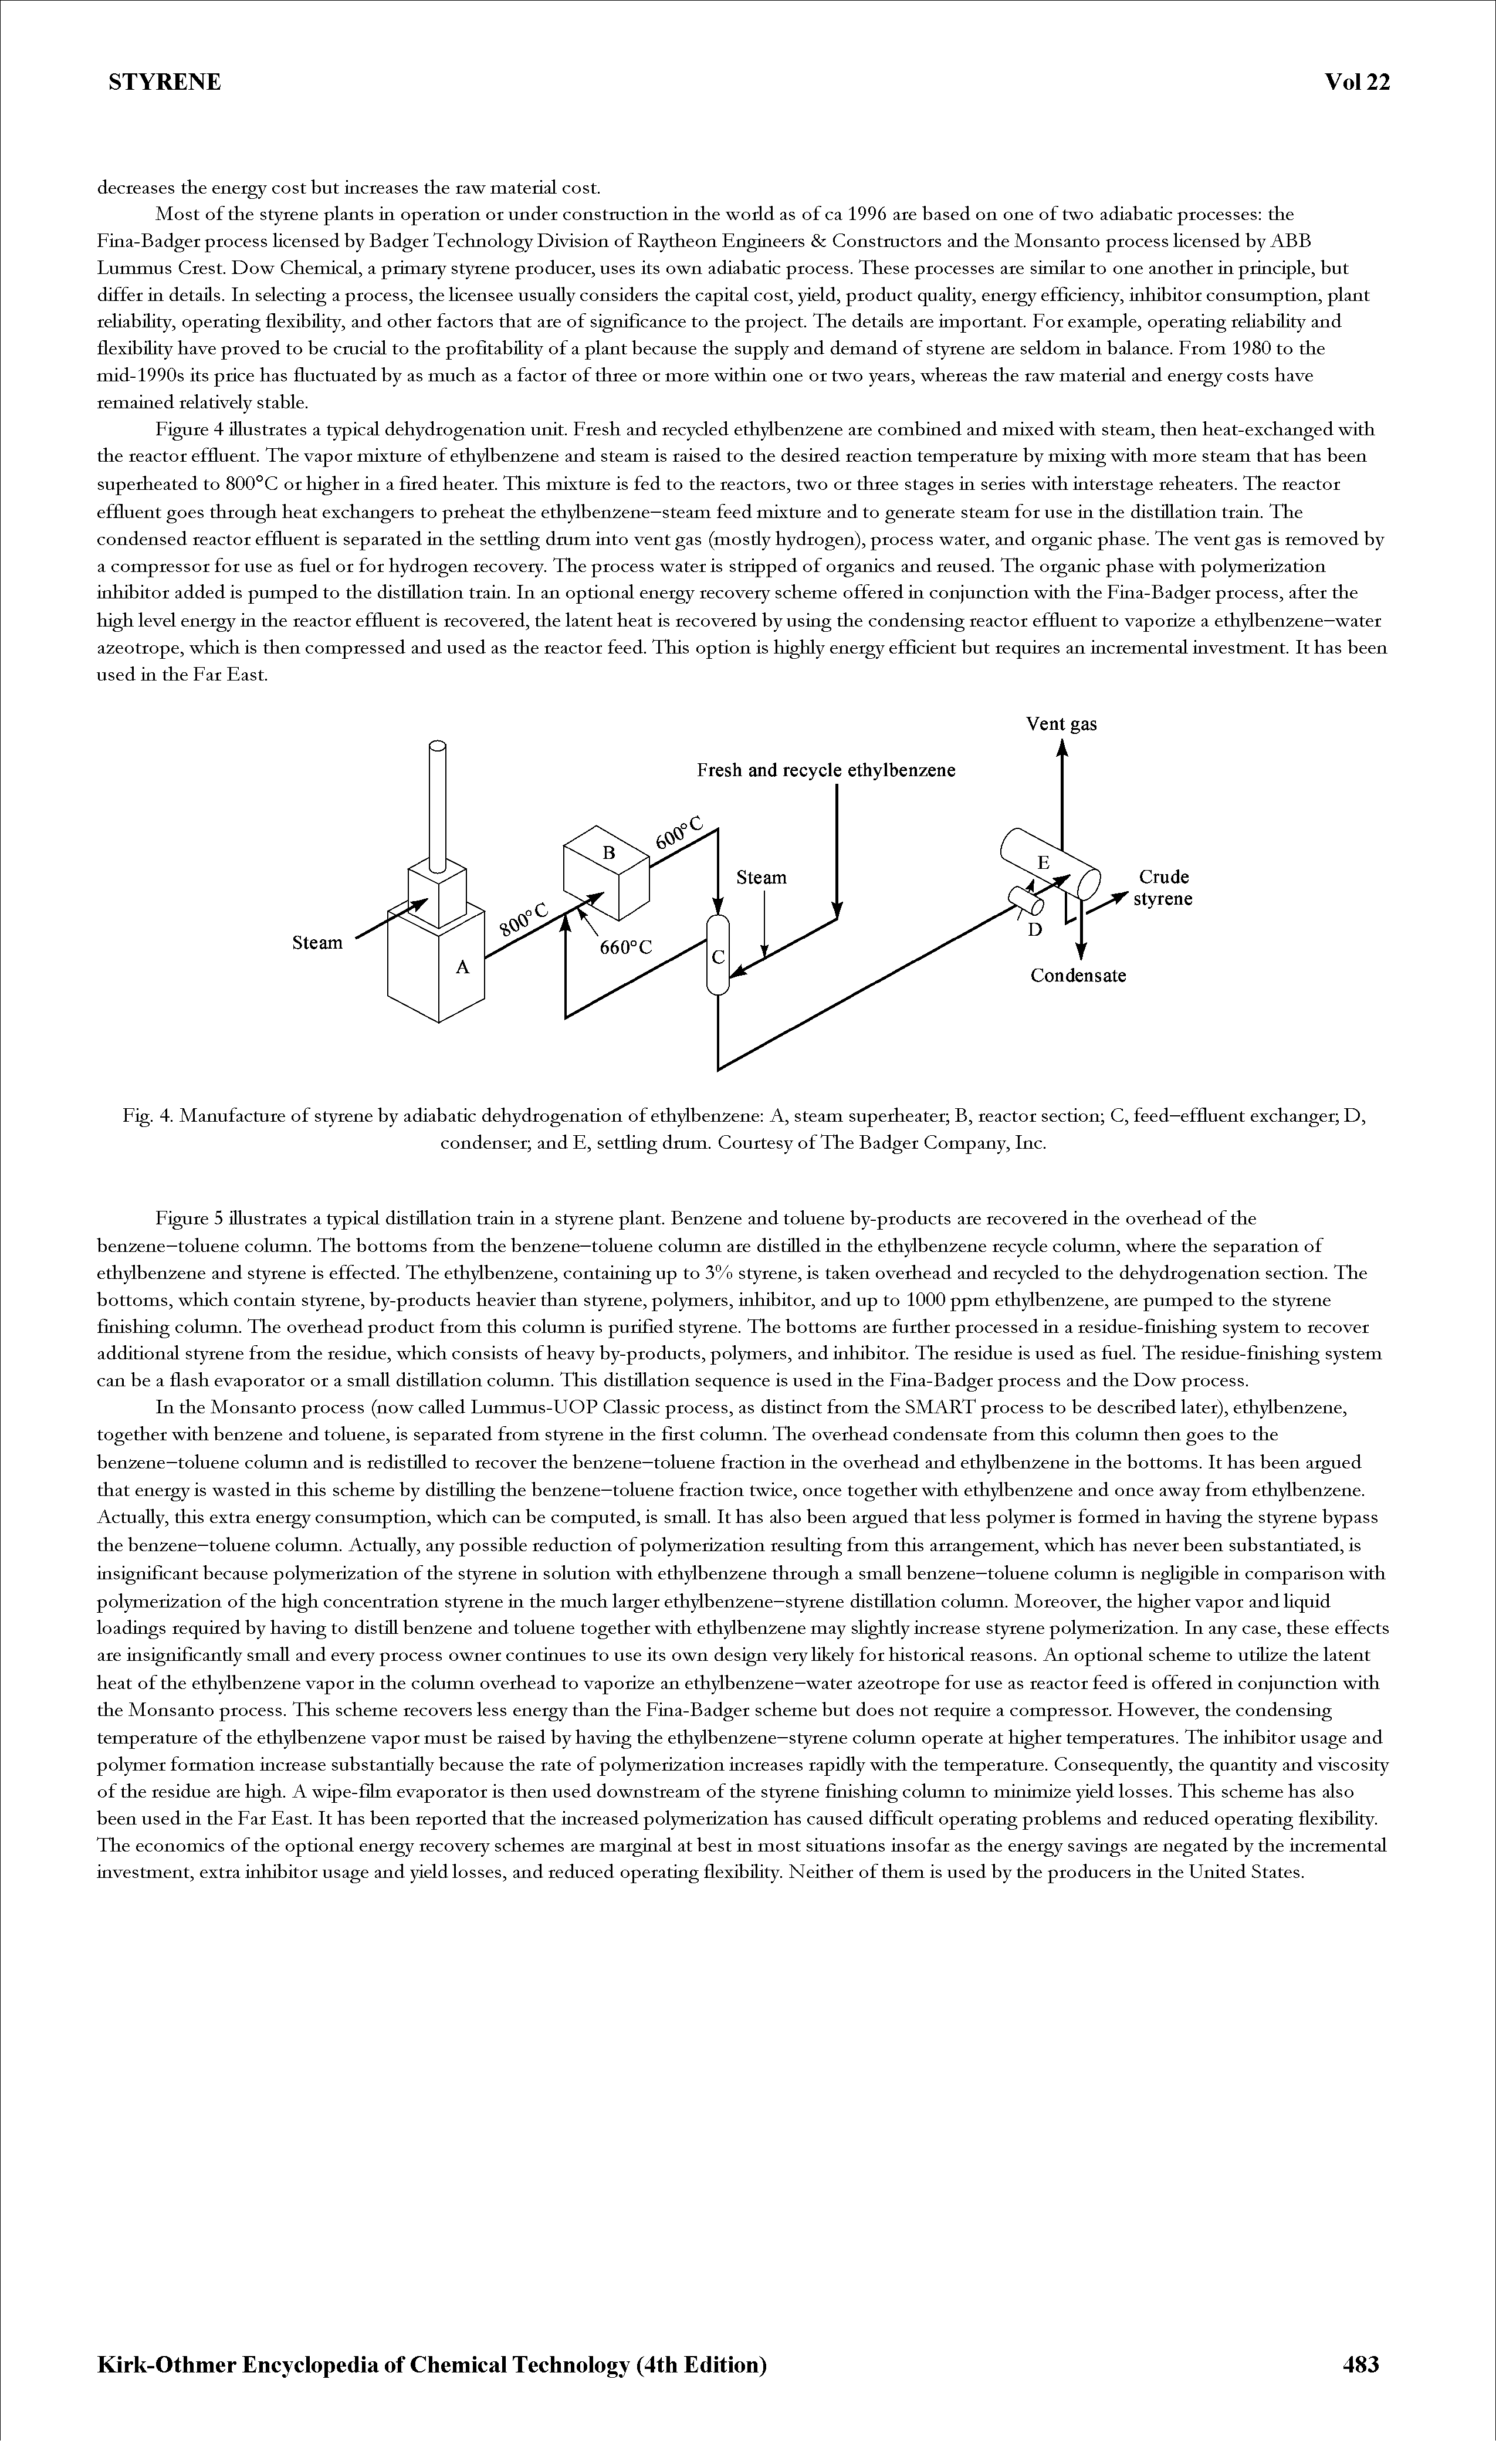 Fig. 4. Manufacture of styrene by adiabatic dehydrogenation of ethylbenzene A, steam superheater B, reactor section C, feed—effluent exchanger D,...